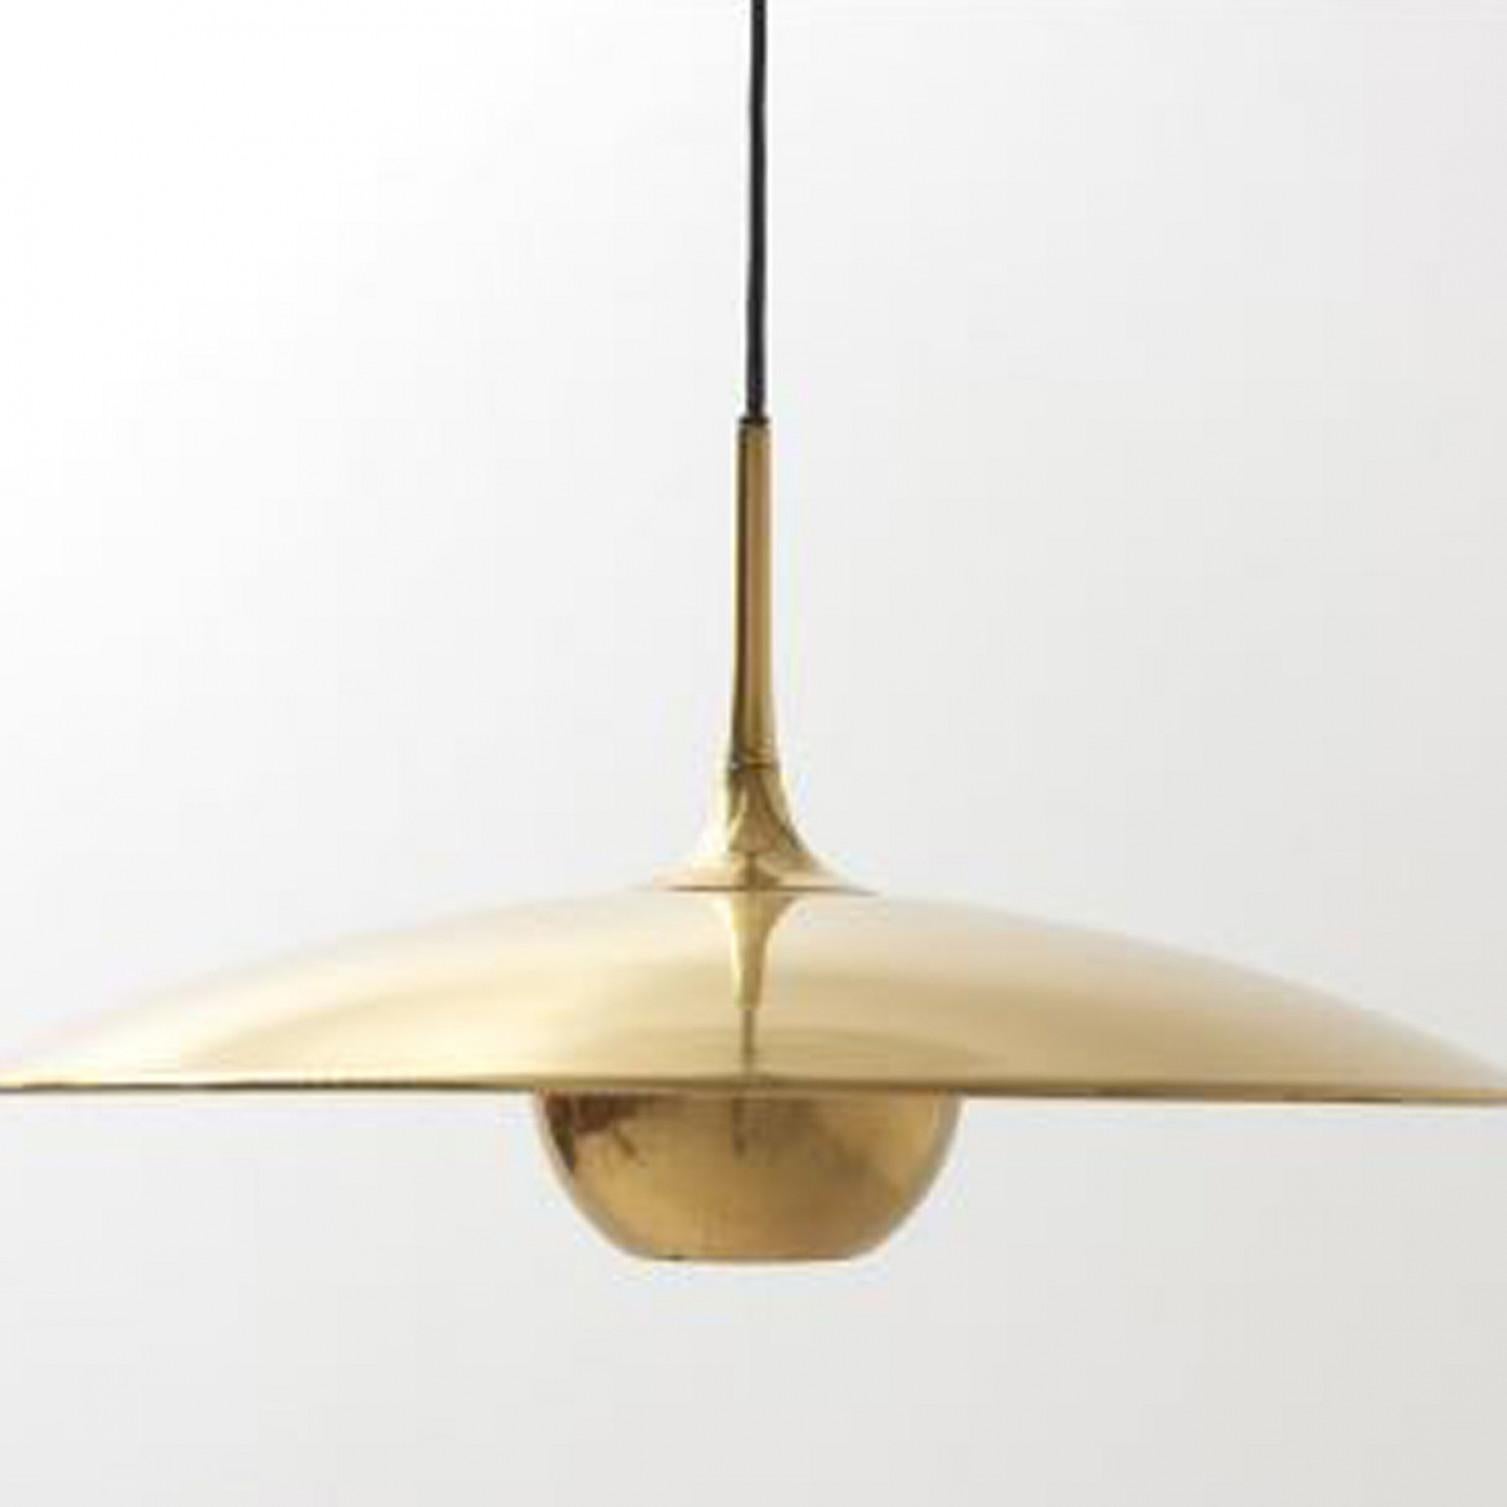 Late 20th Century Onos Fixture With Side Counter Weights by Florian Schulz For Sale